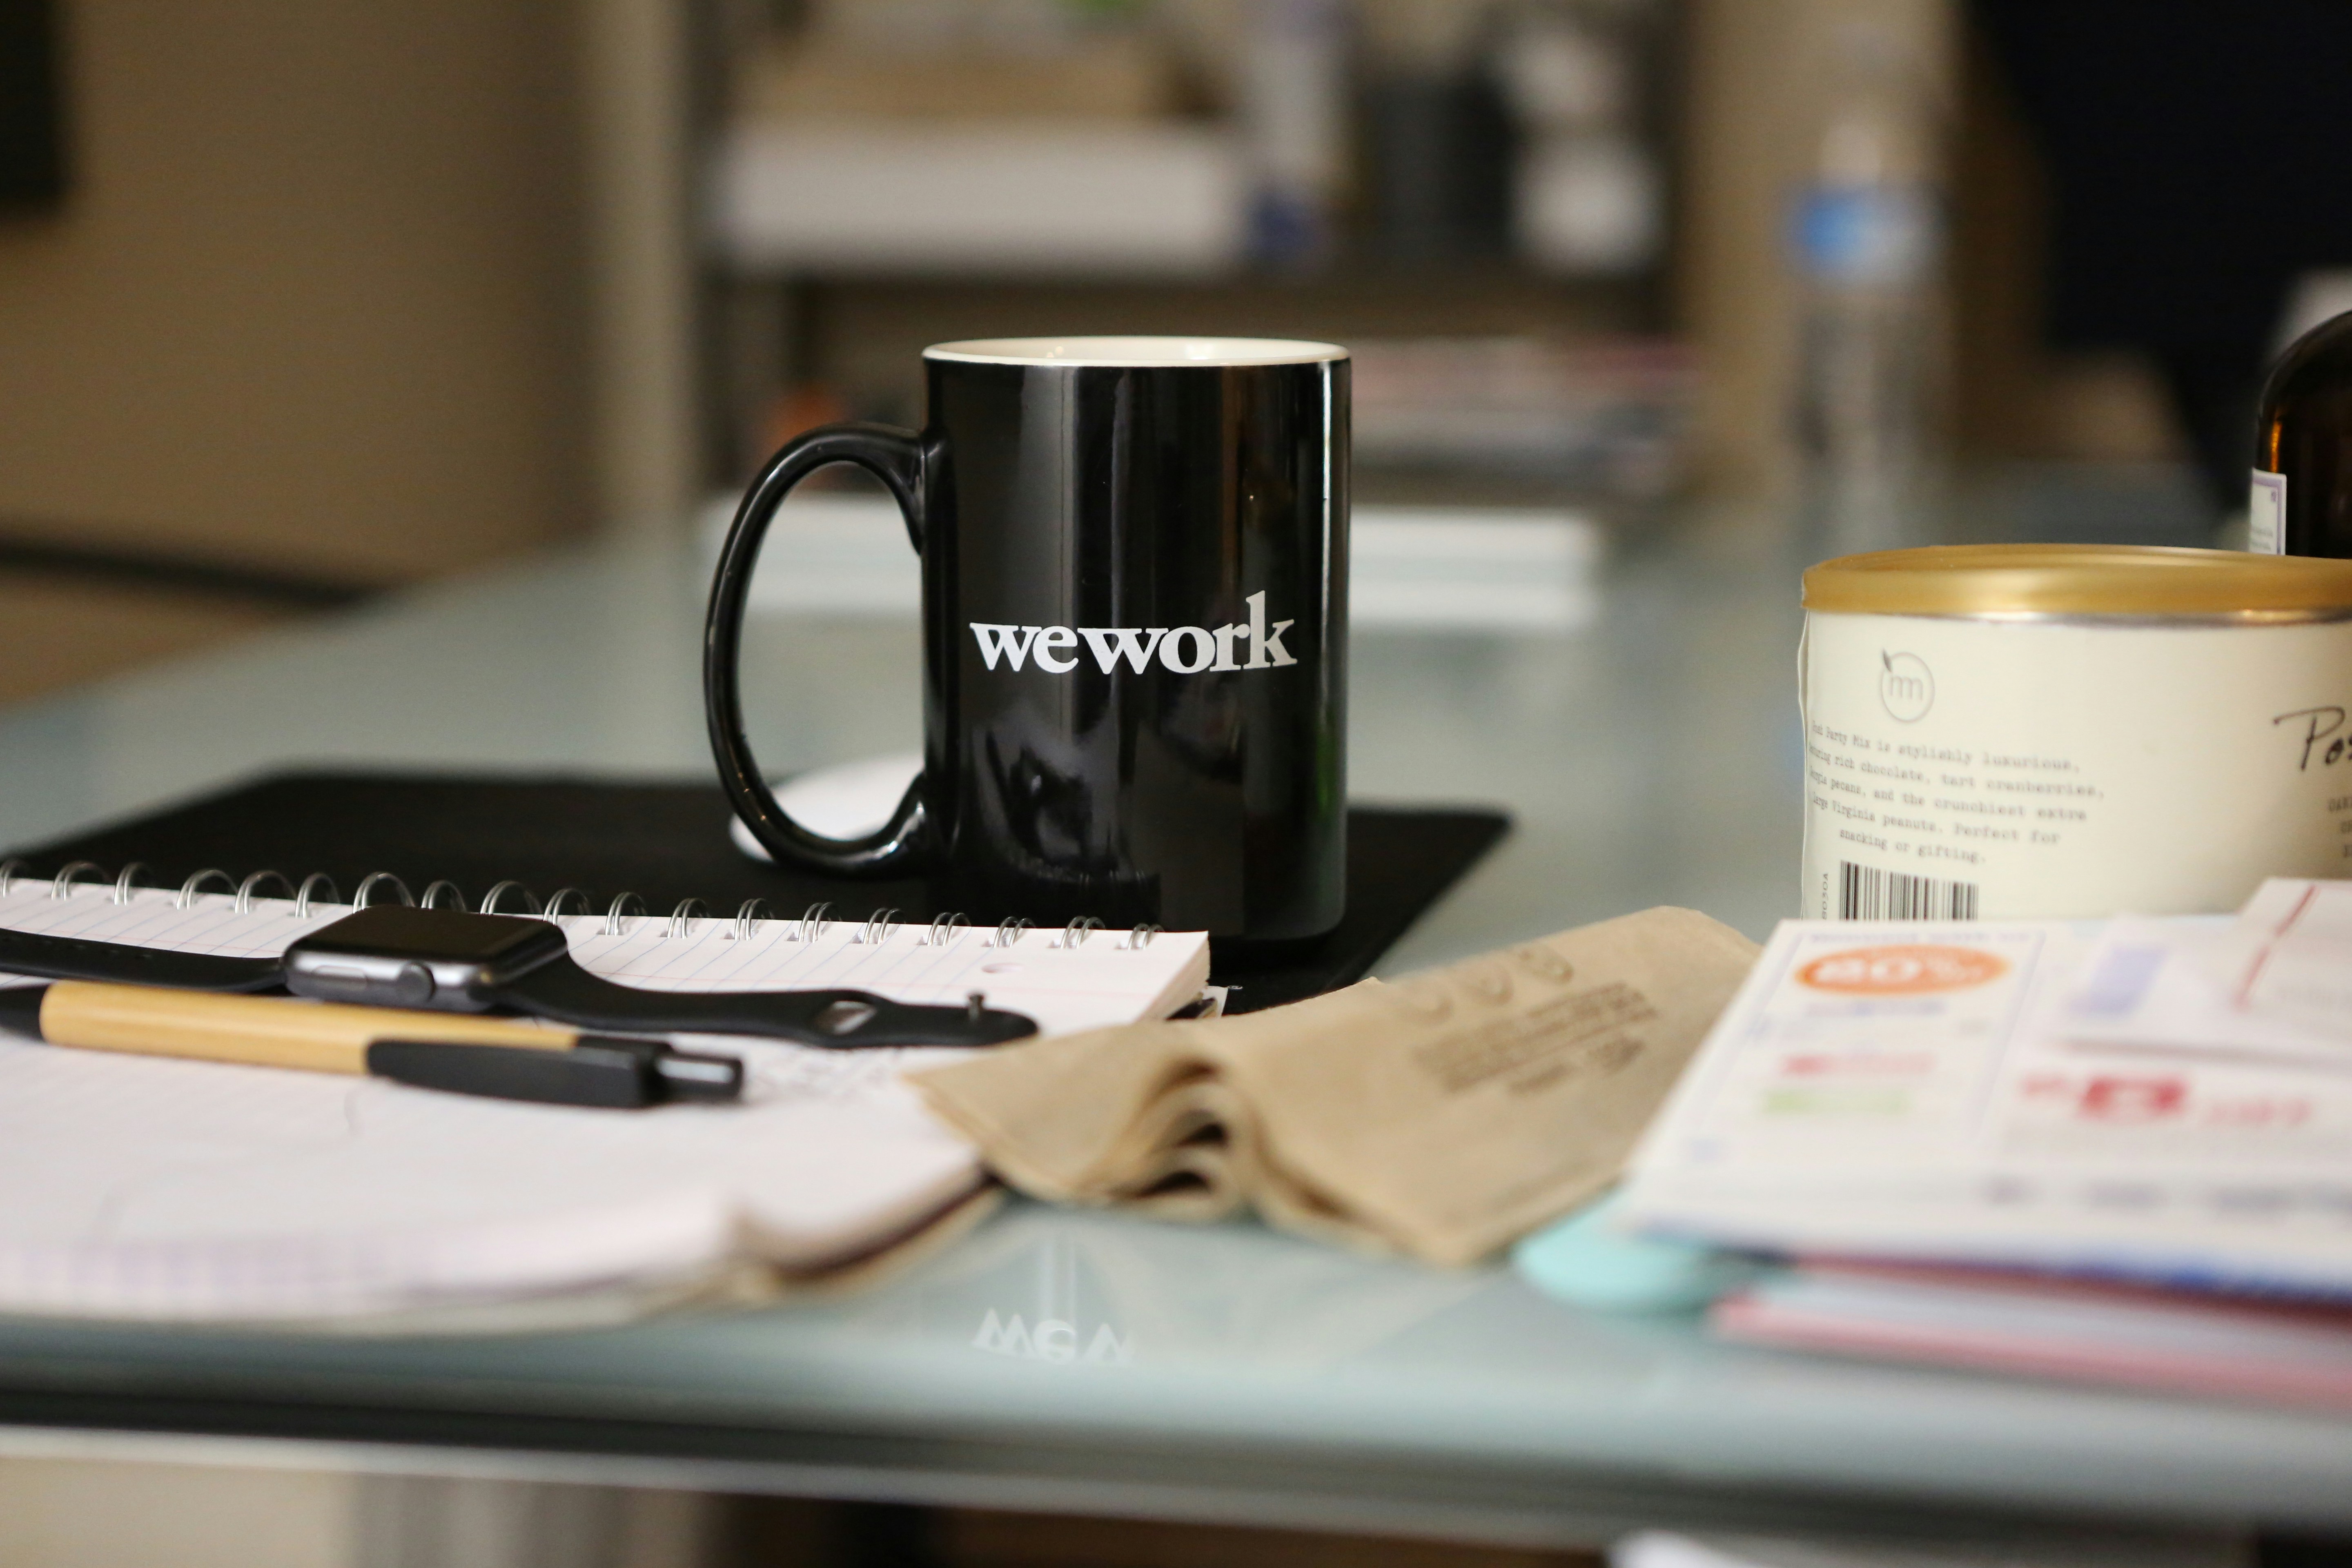 Coffee is essential for a productive work day.